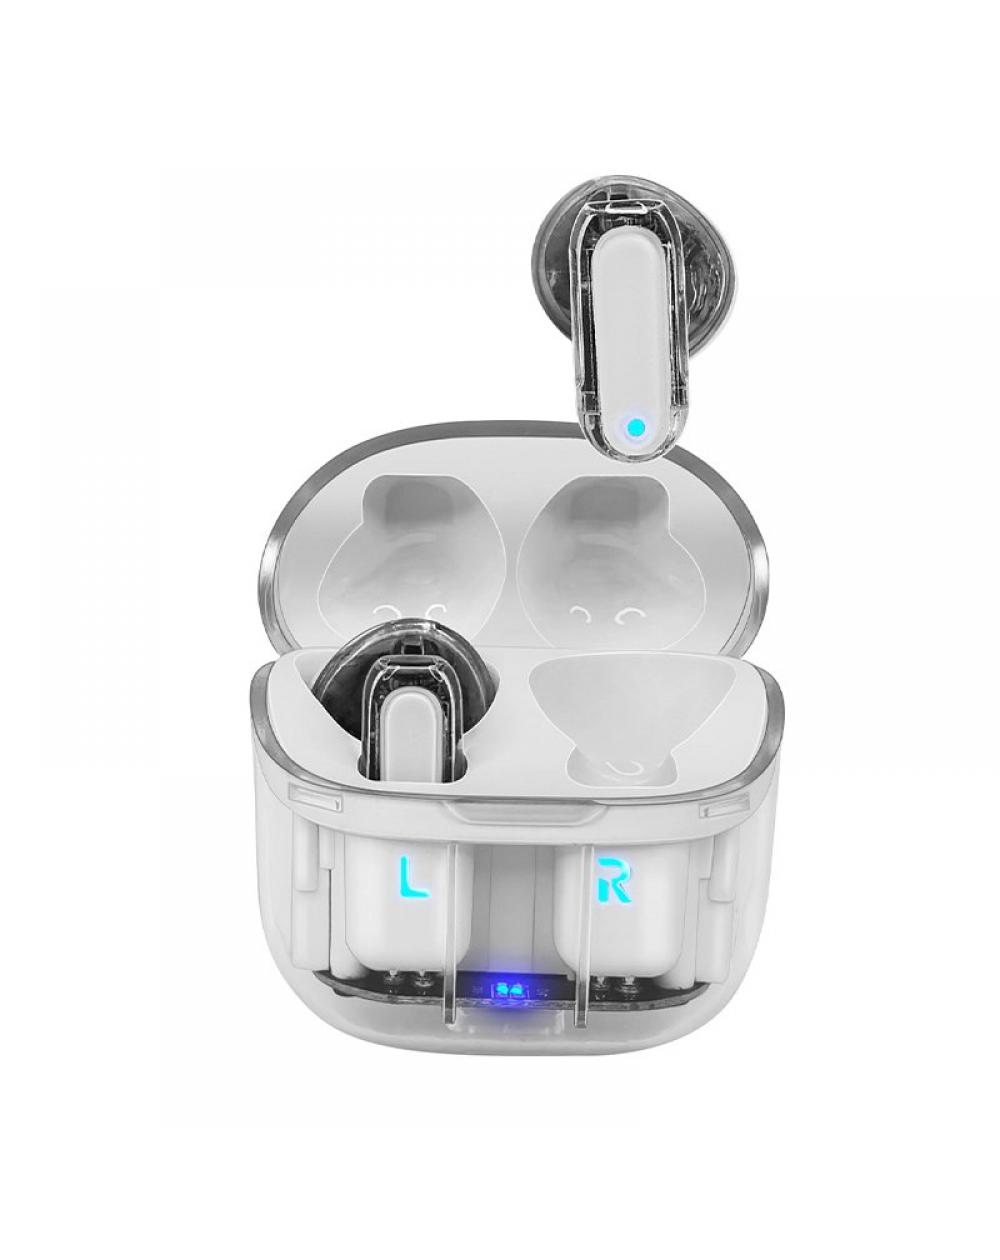 Auriculares Stereo Bluetooth Dual Pod Earbuds COOL Crystal Blanco